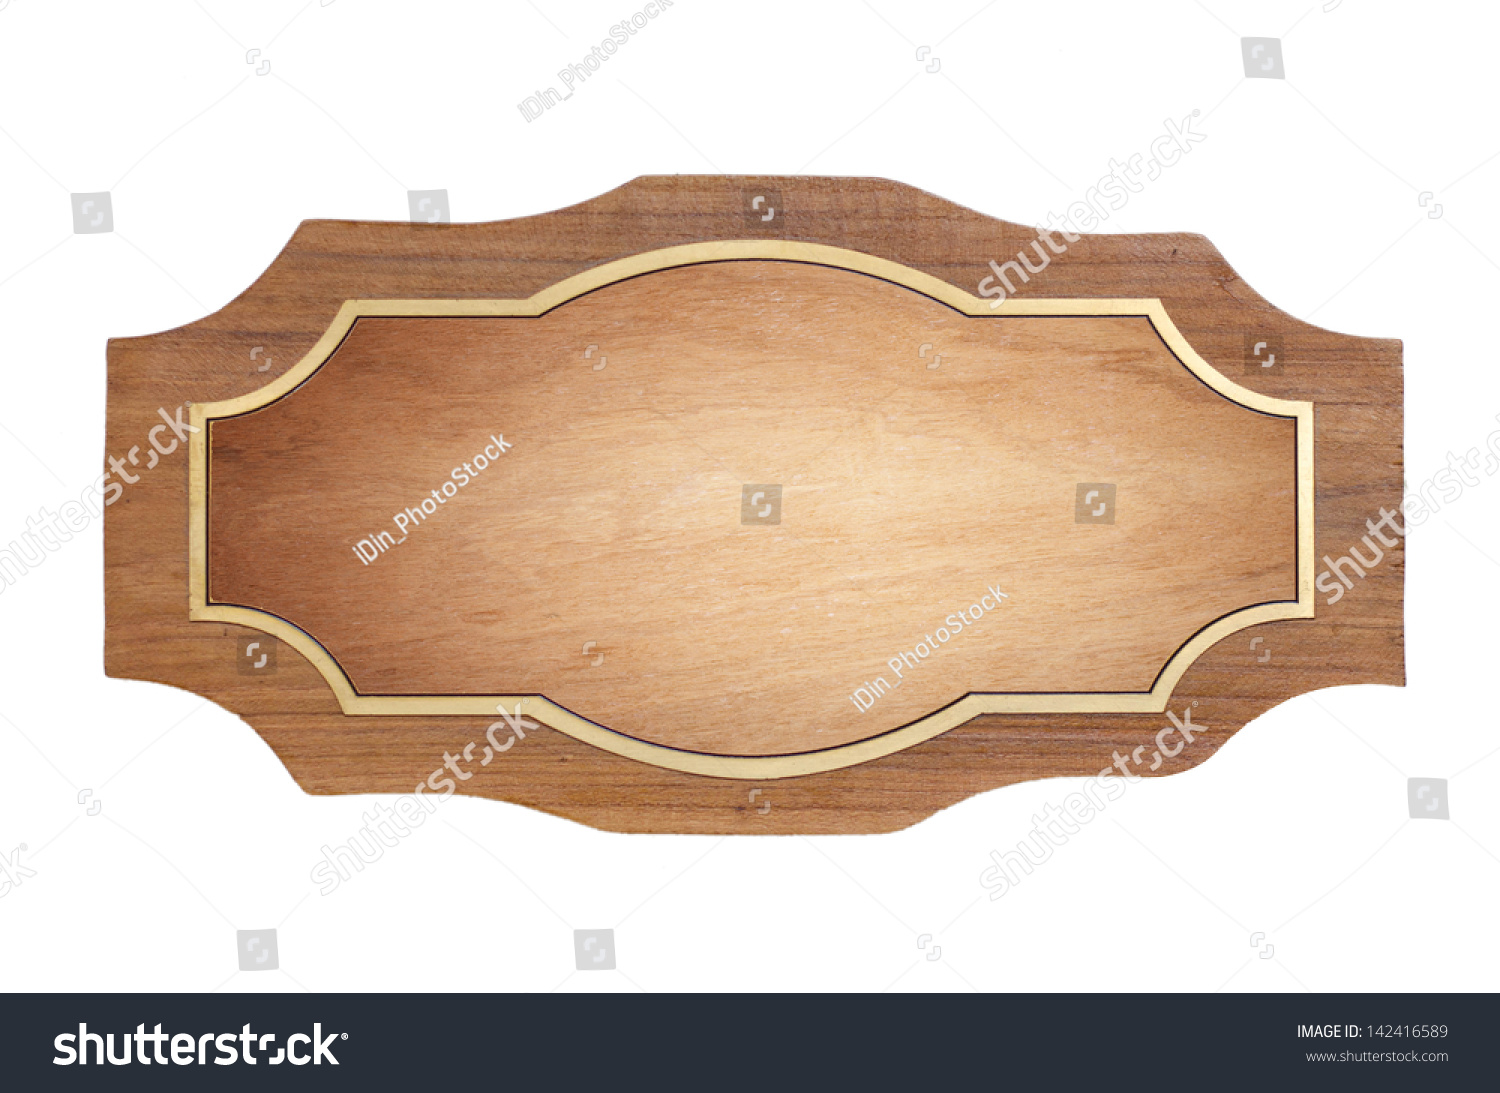 Wood Sign, Isolated On White Stock Photo 142416589 : Shutterstock